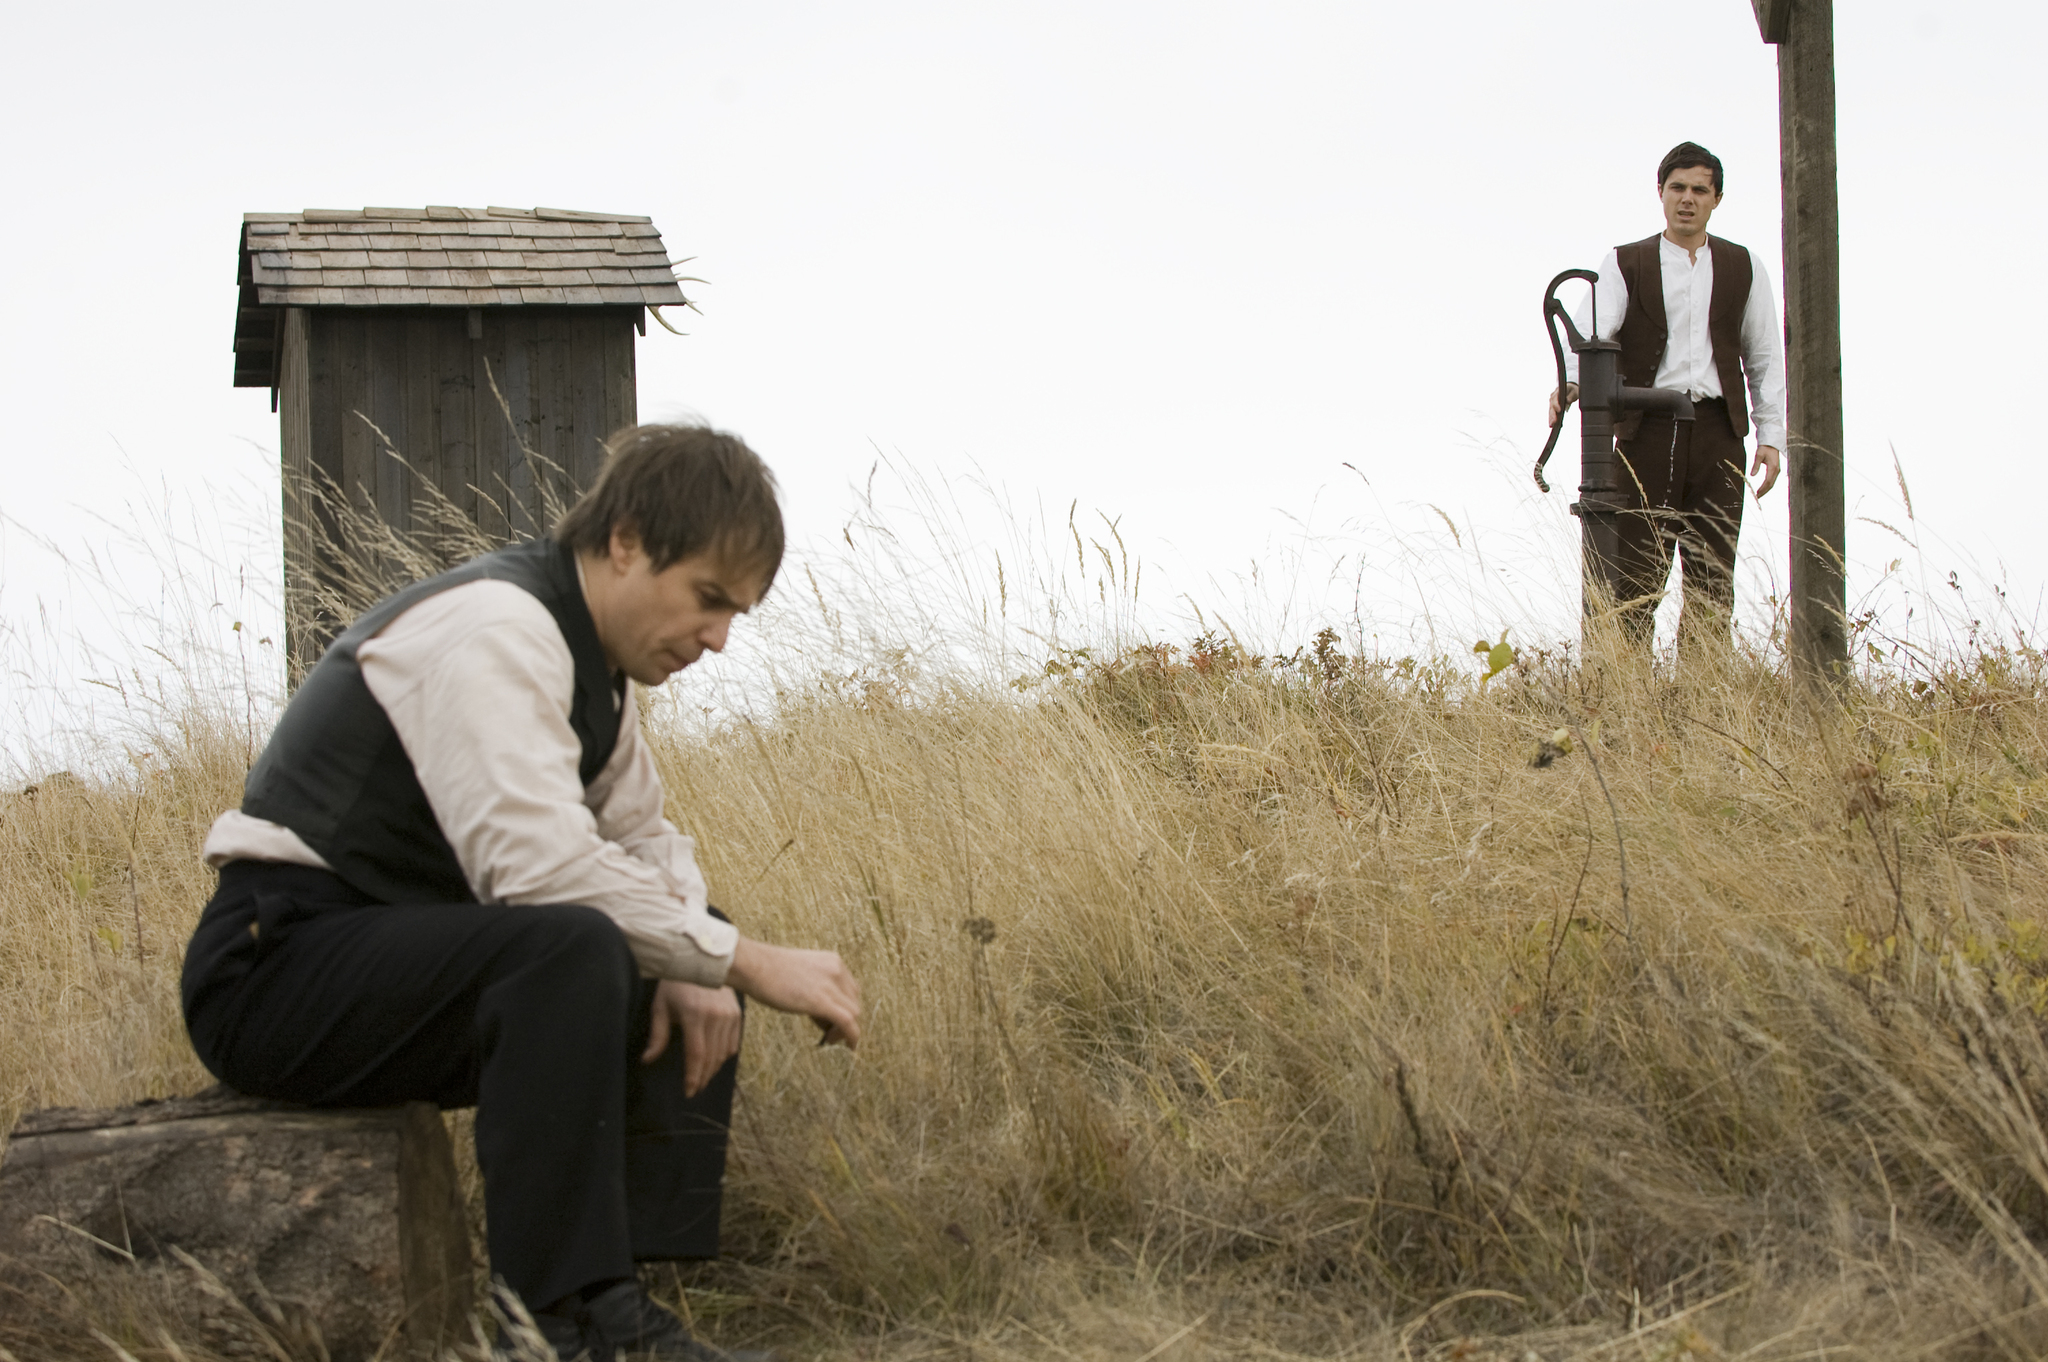 The Assassination of Jesse James by the Coward Robert Ford (2007) Screenshot 5